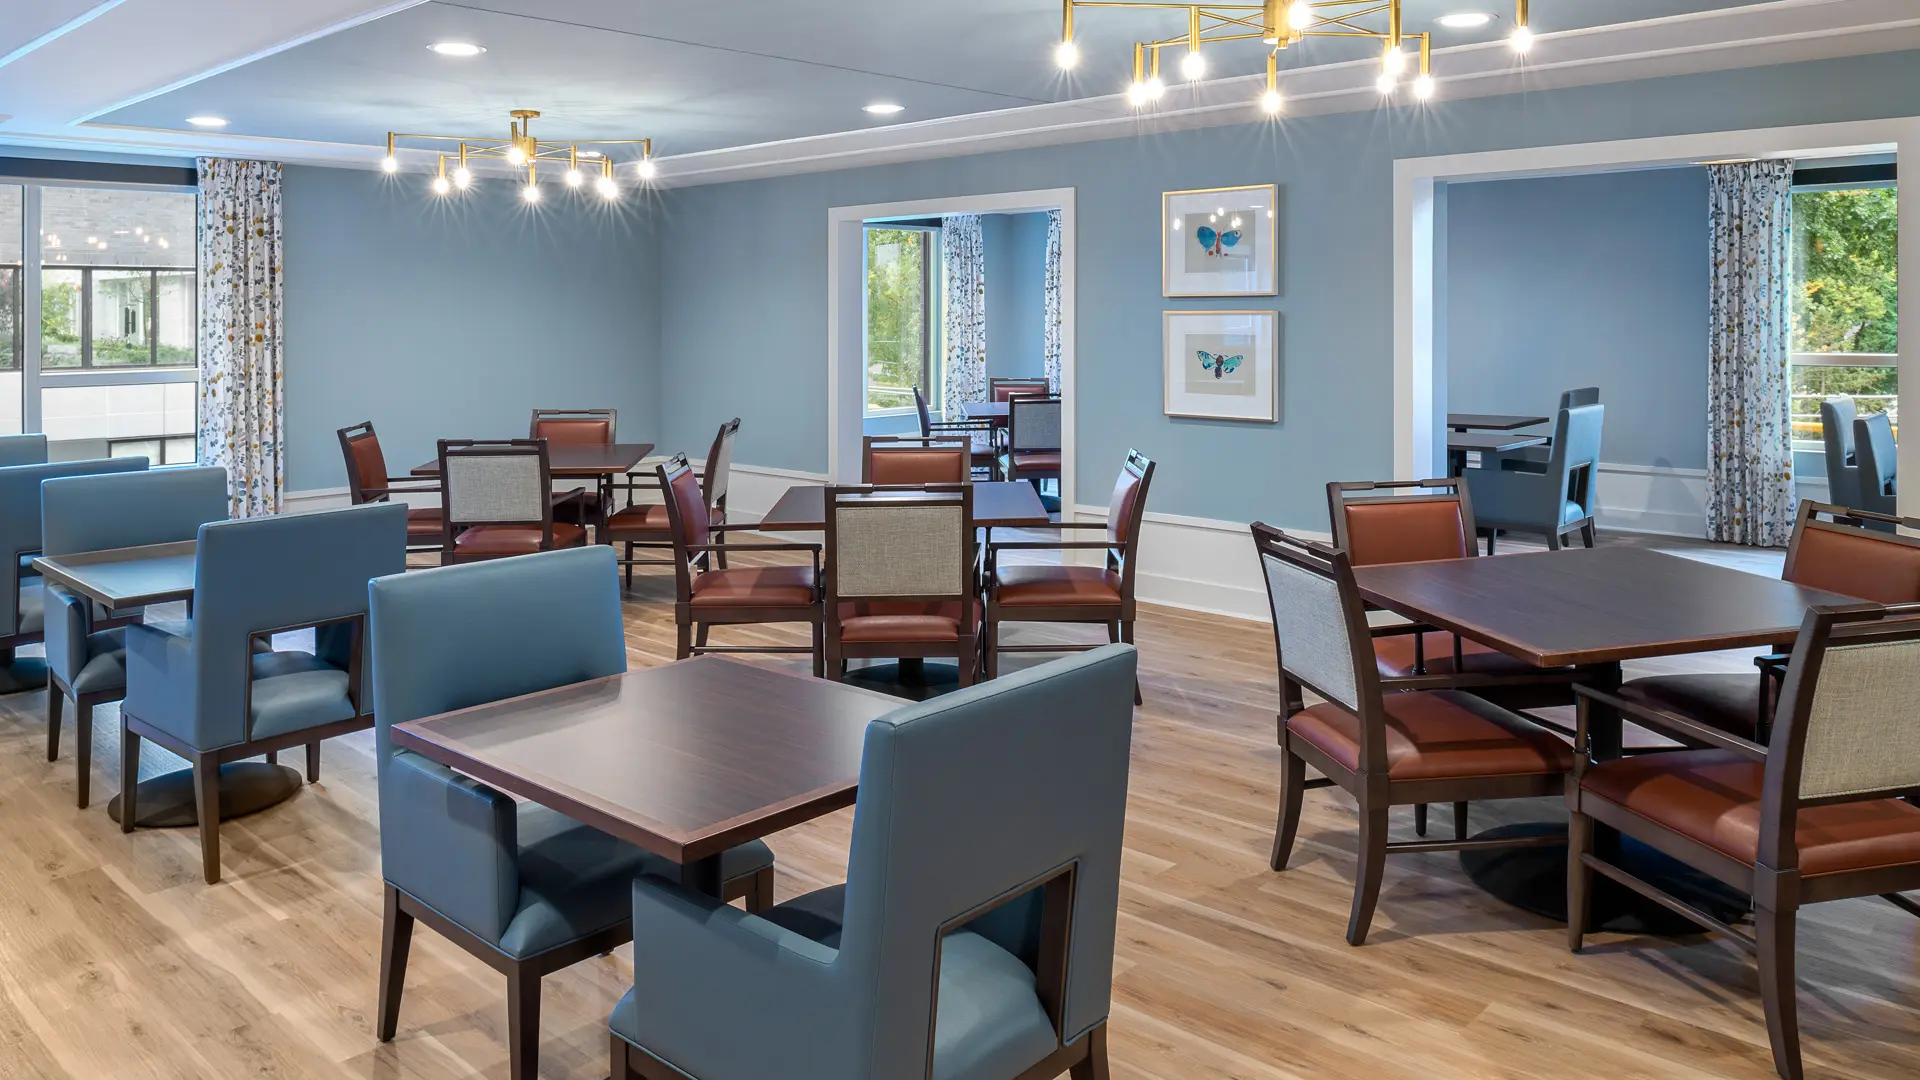 Dining room for memory care at American House Oak Park, a luxury memory care facility in Oak Park, Illinois